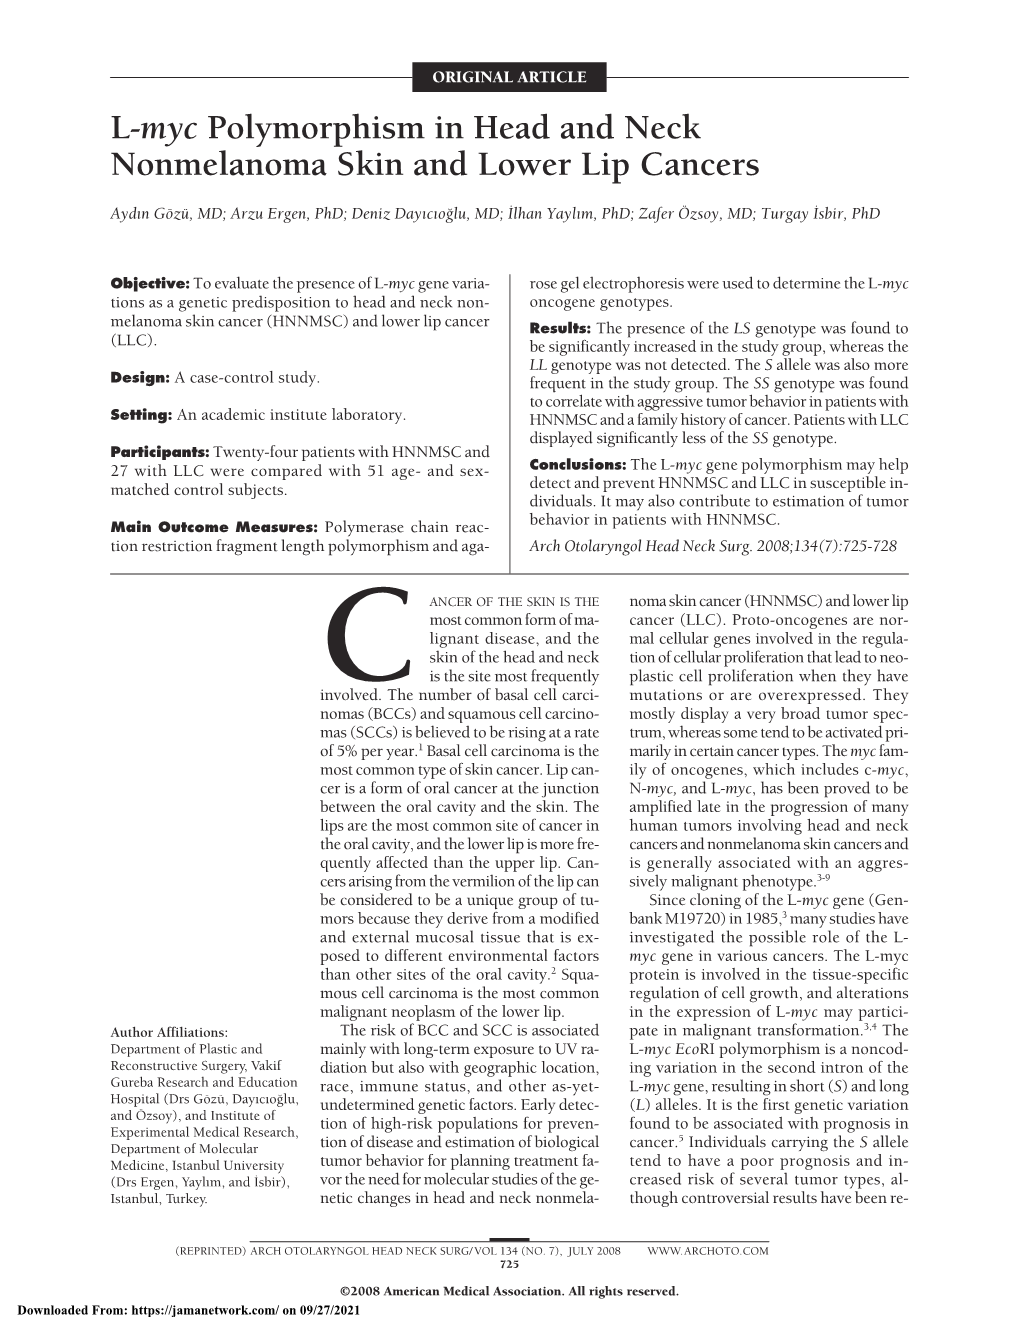 L-Myc Polymorphism in Head and Neck Nonmelanoma Skin and Lower Lip Cancers